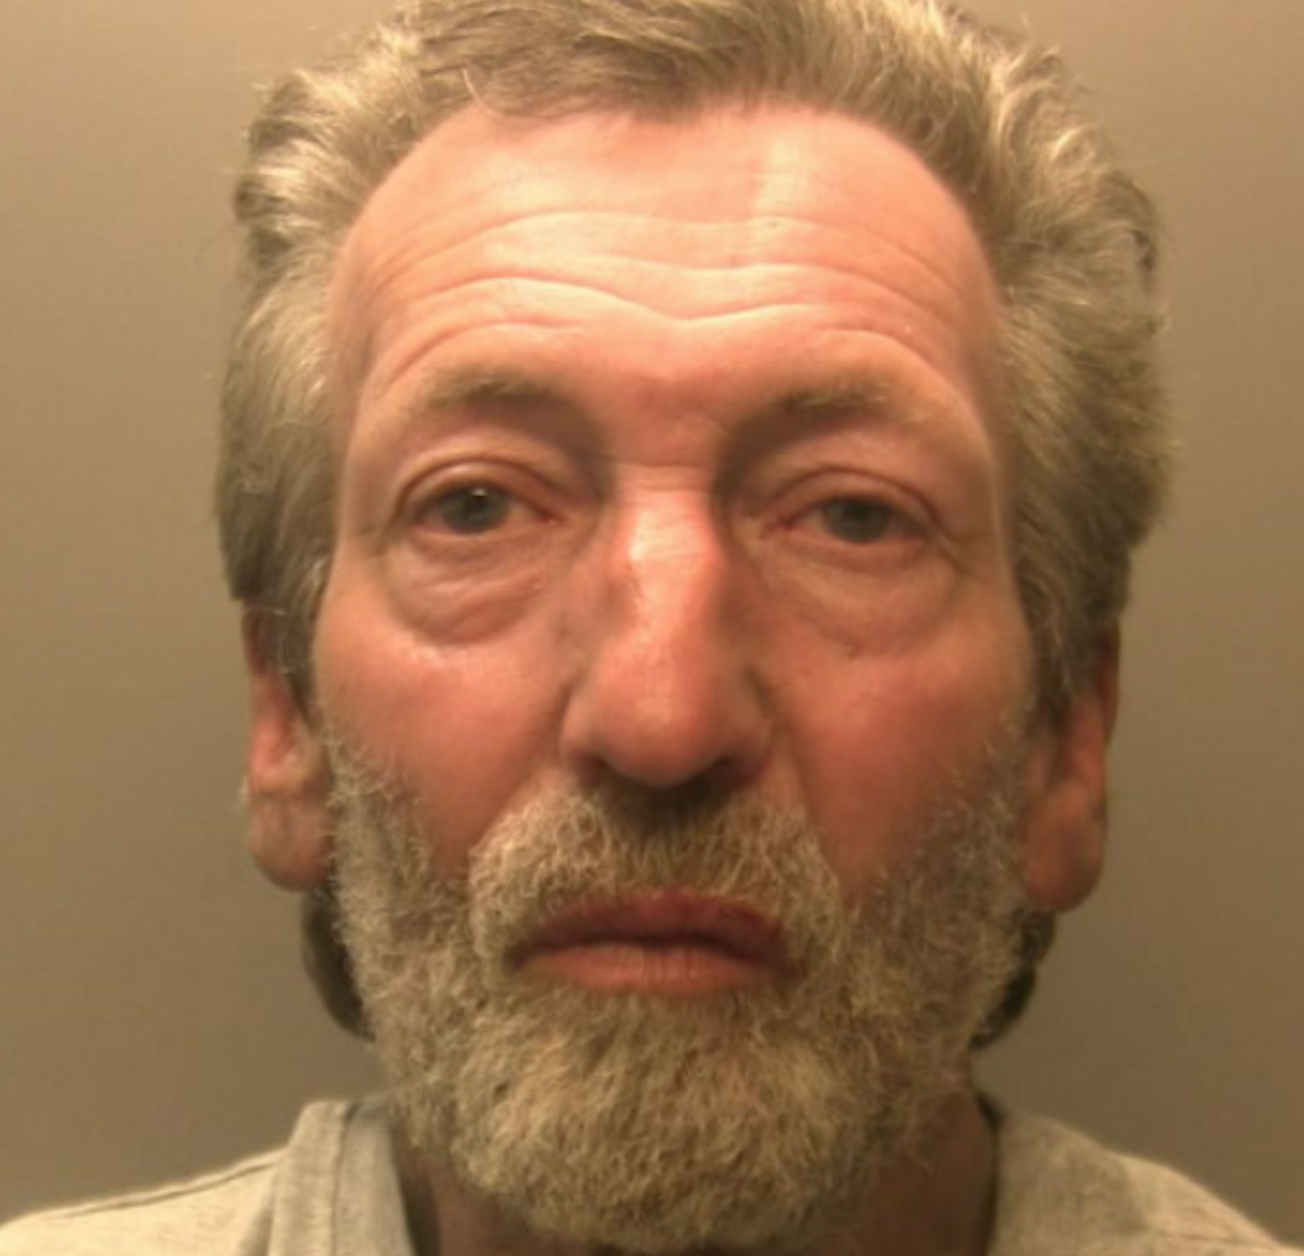 Police appeal for missing Newport man